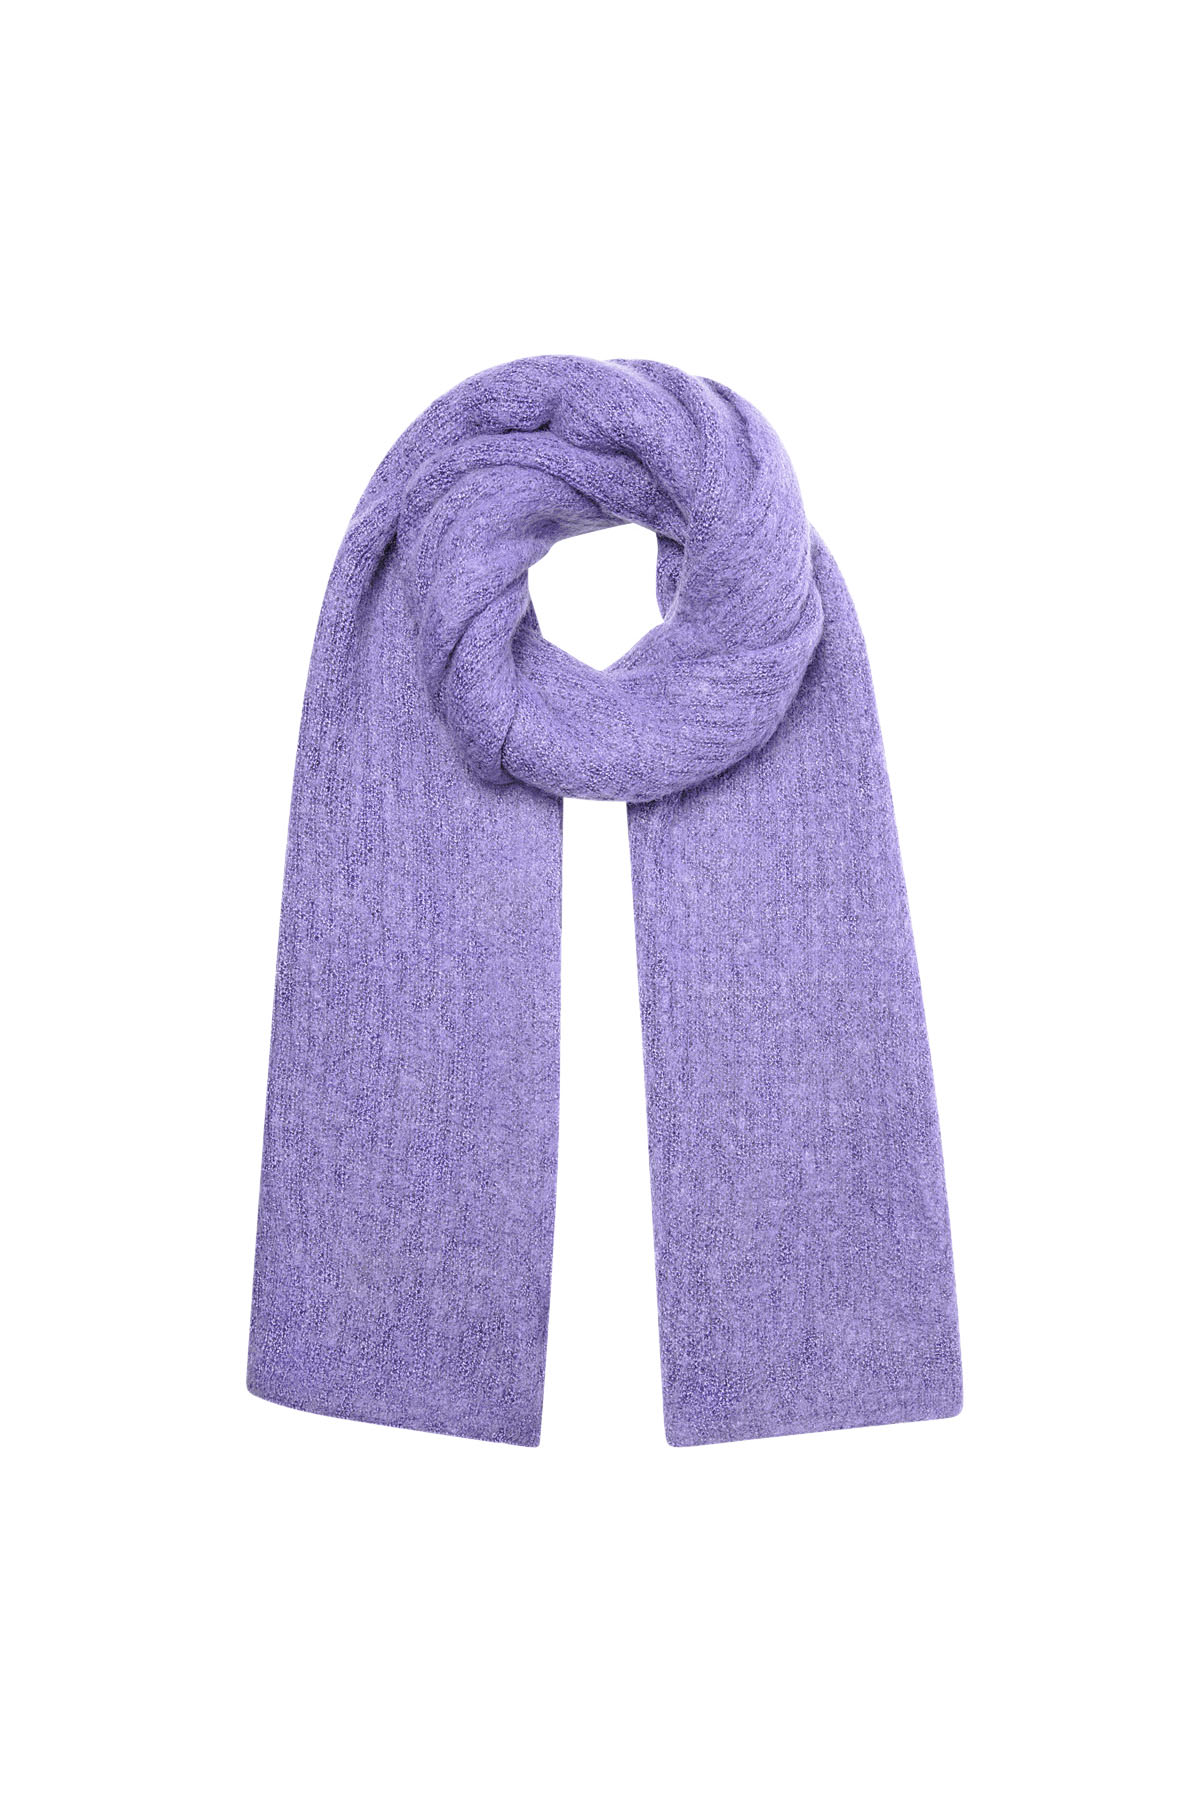 Scarf knitted plain - lilac